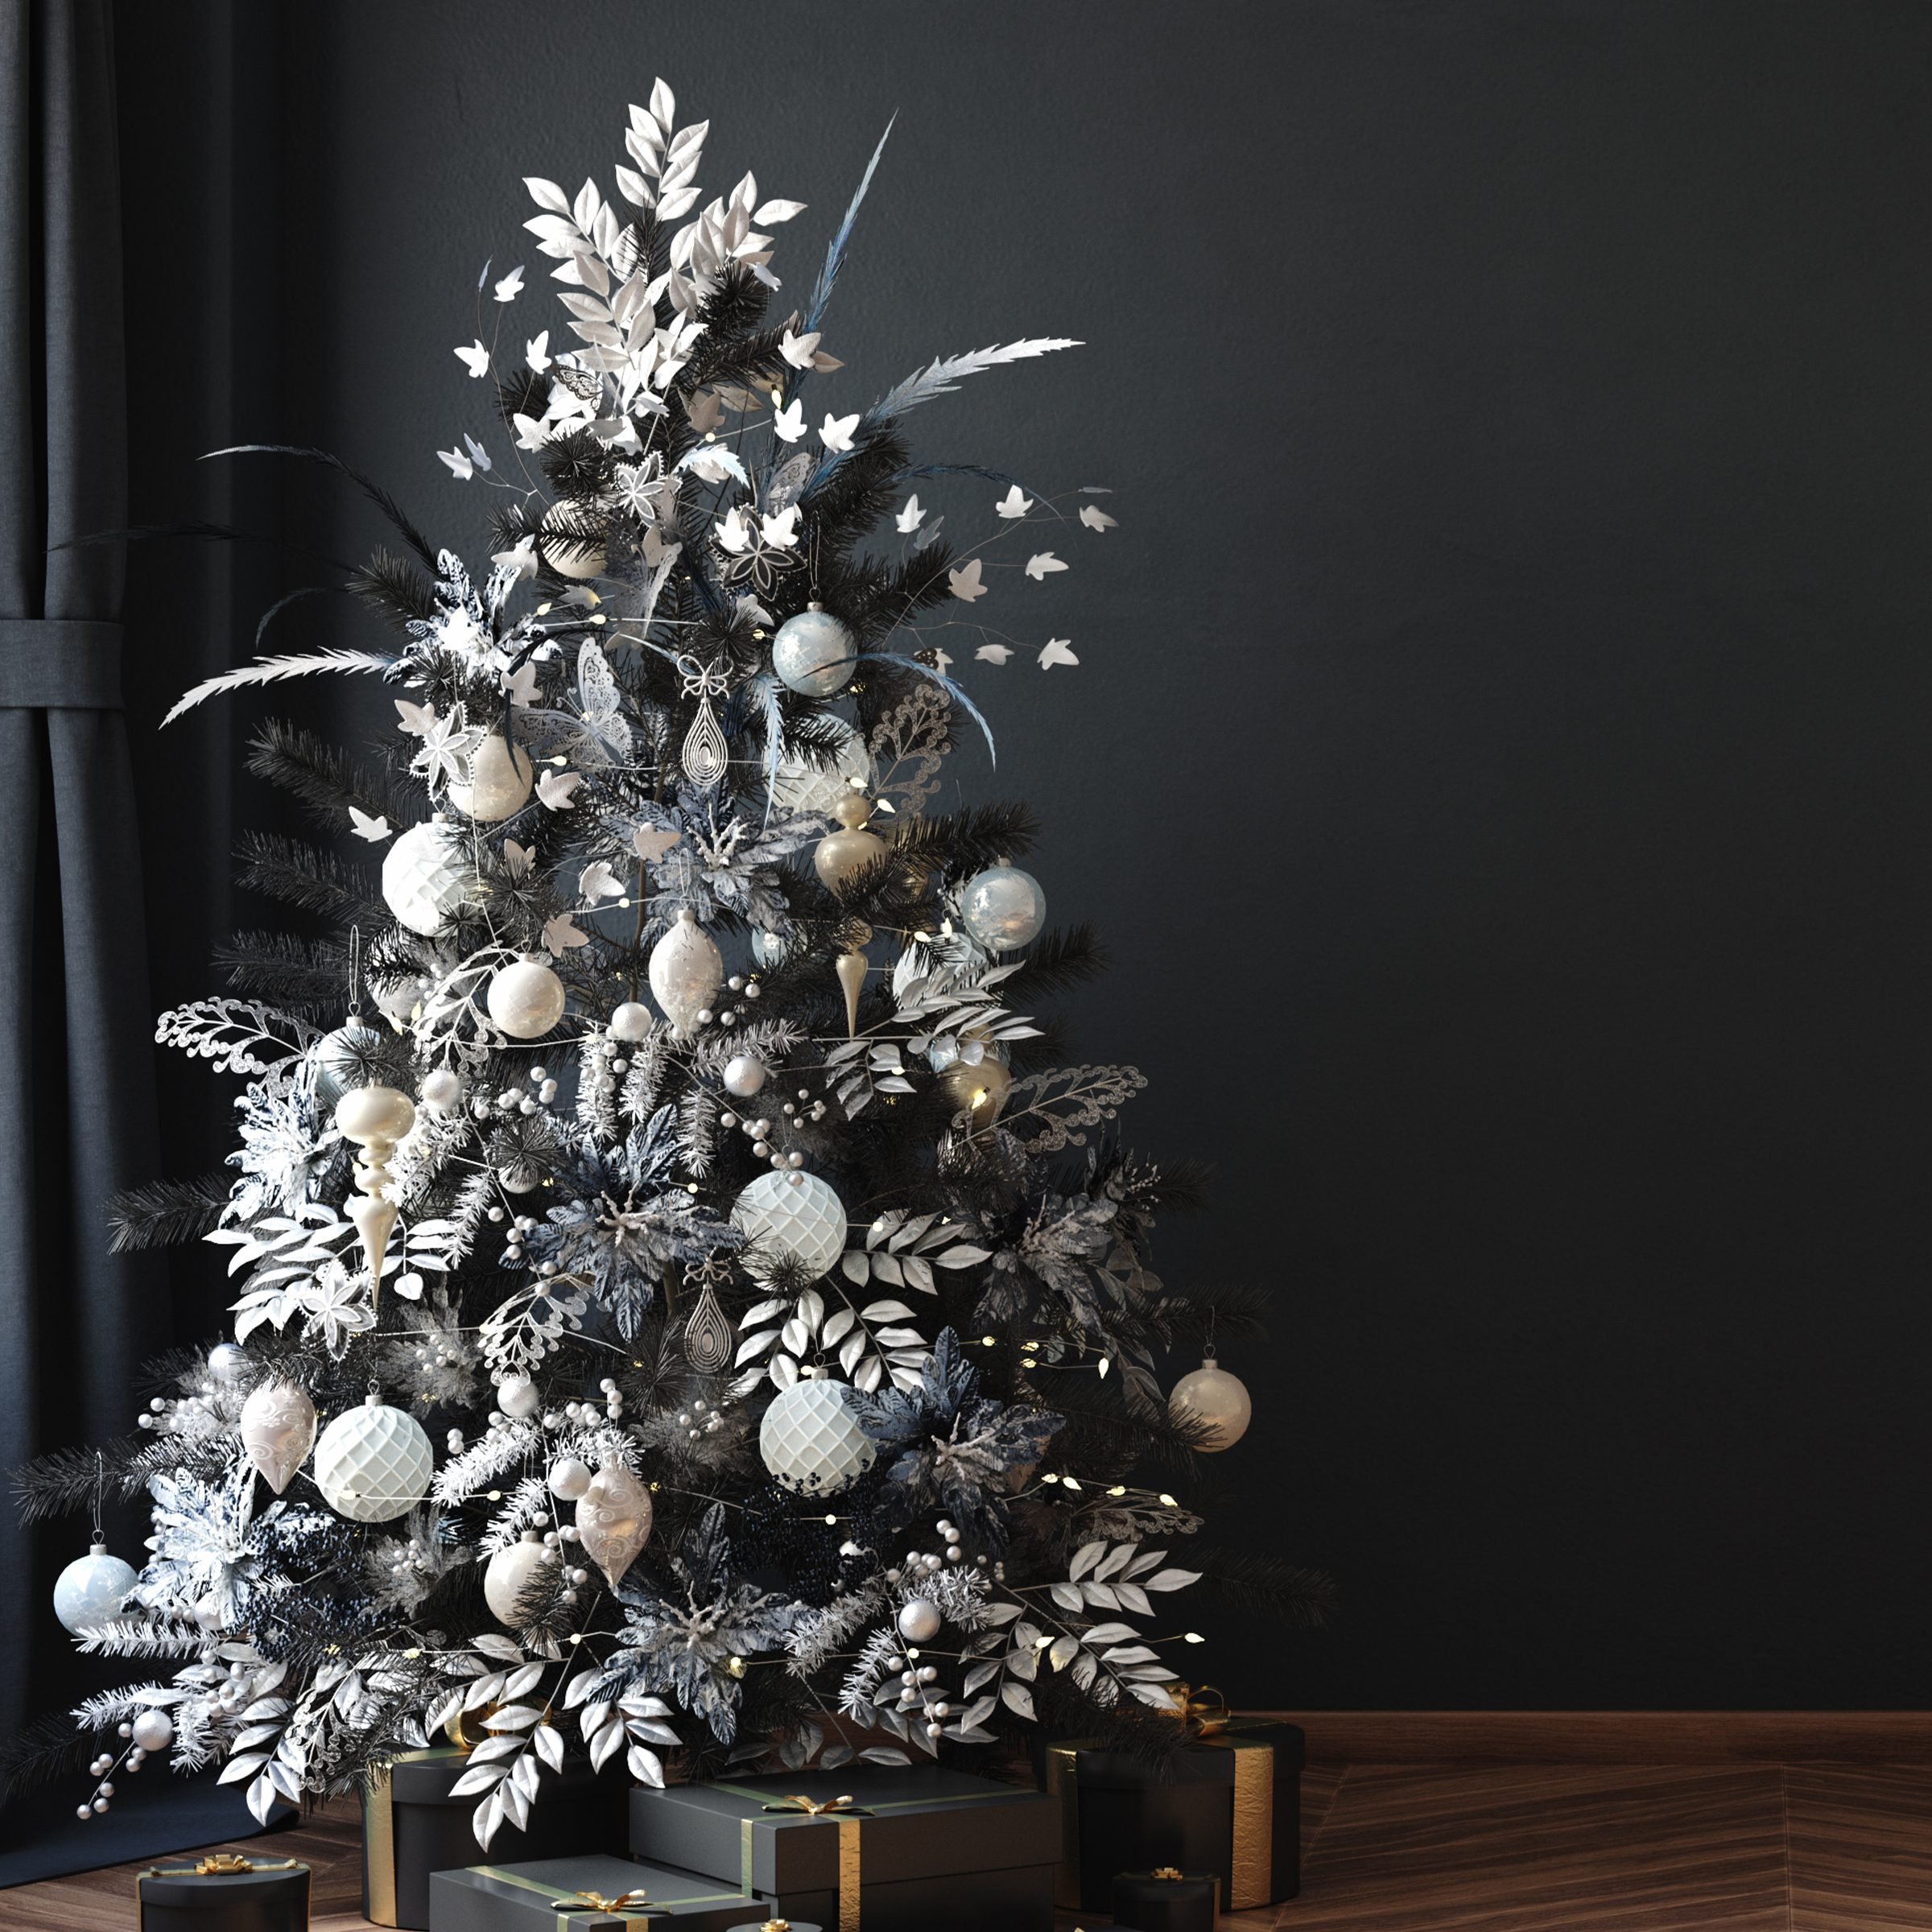 45 Awesome Silver and White Christmas Tree Decorating Ideas - Matchness.com   Black christmas decorations, White christmas tree decorations, Gold  christmas decorations